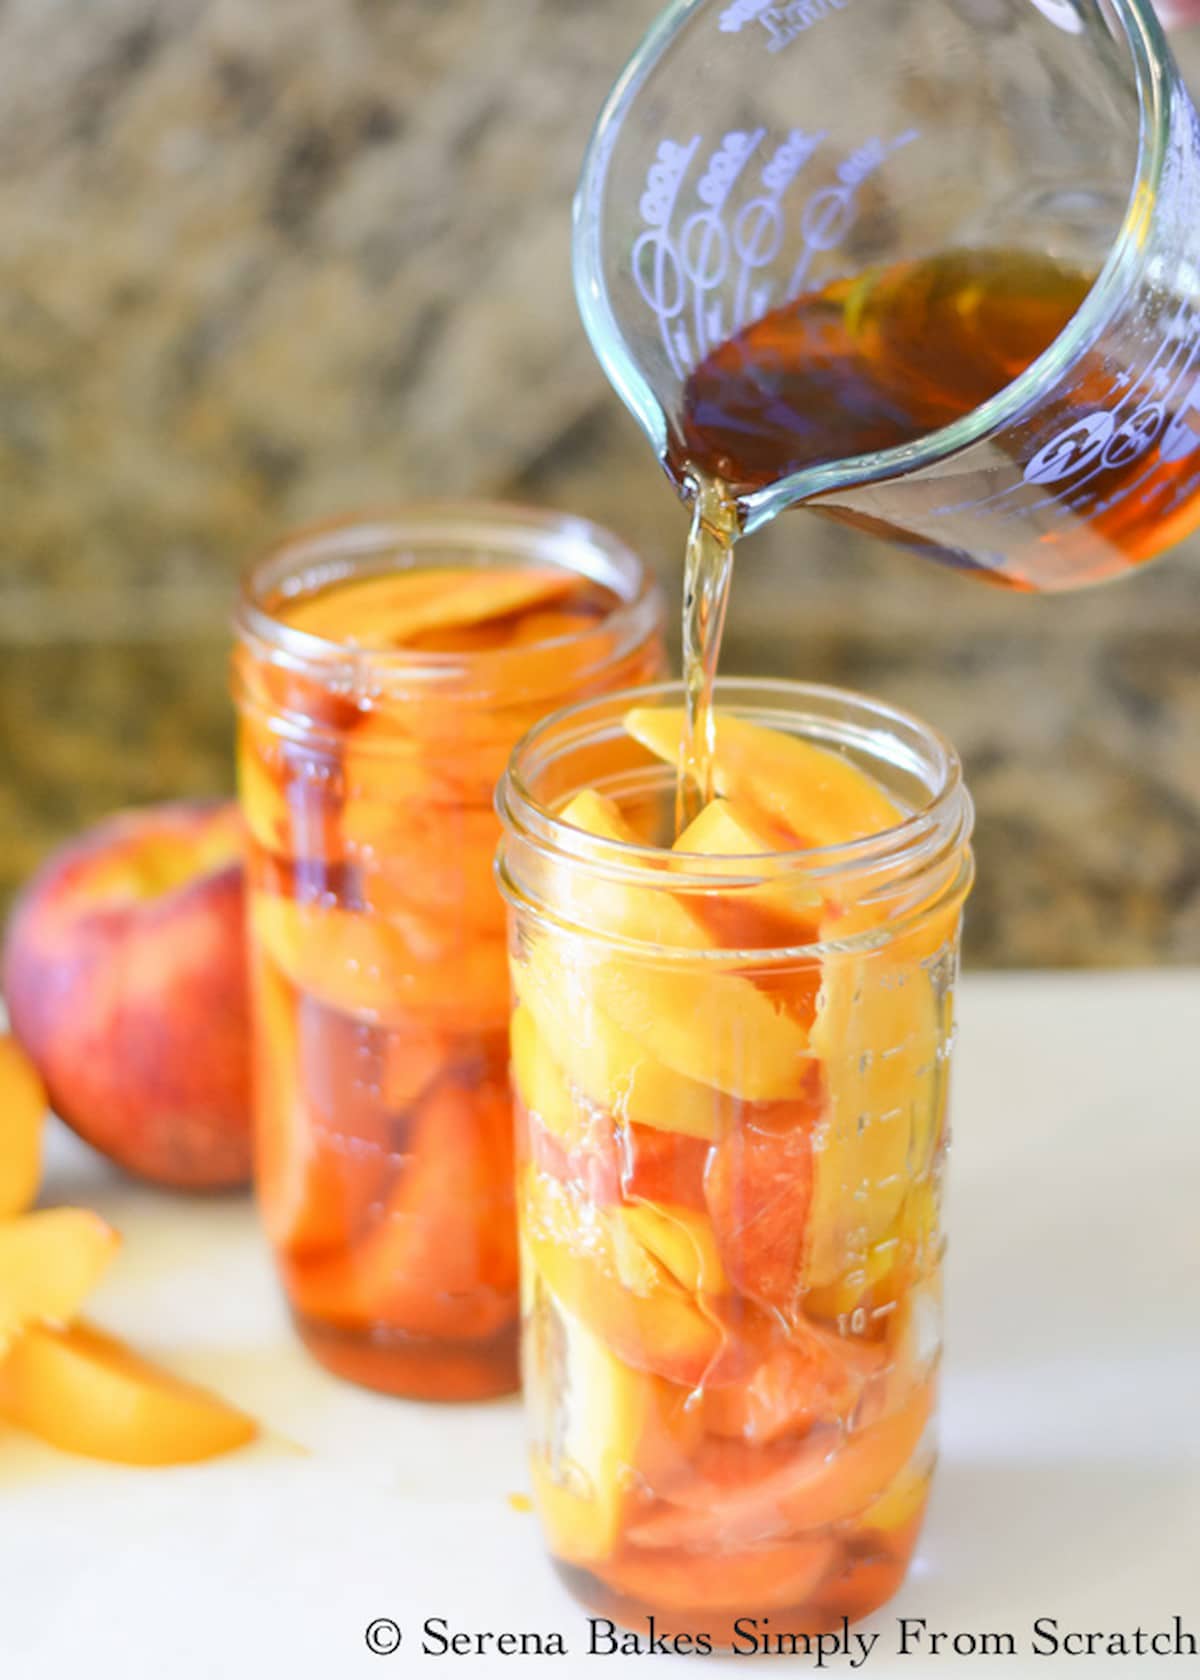 Whisky mixture being poured over peaches in a mason jar to cover.